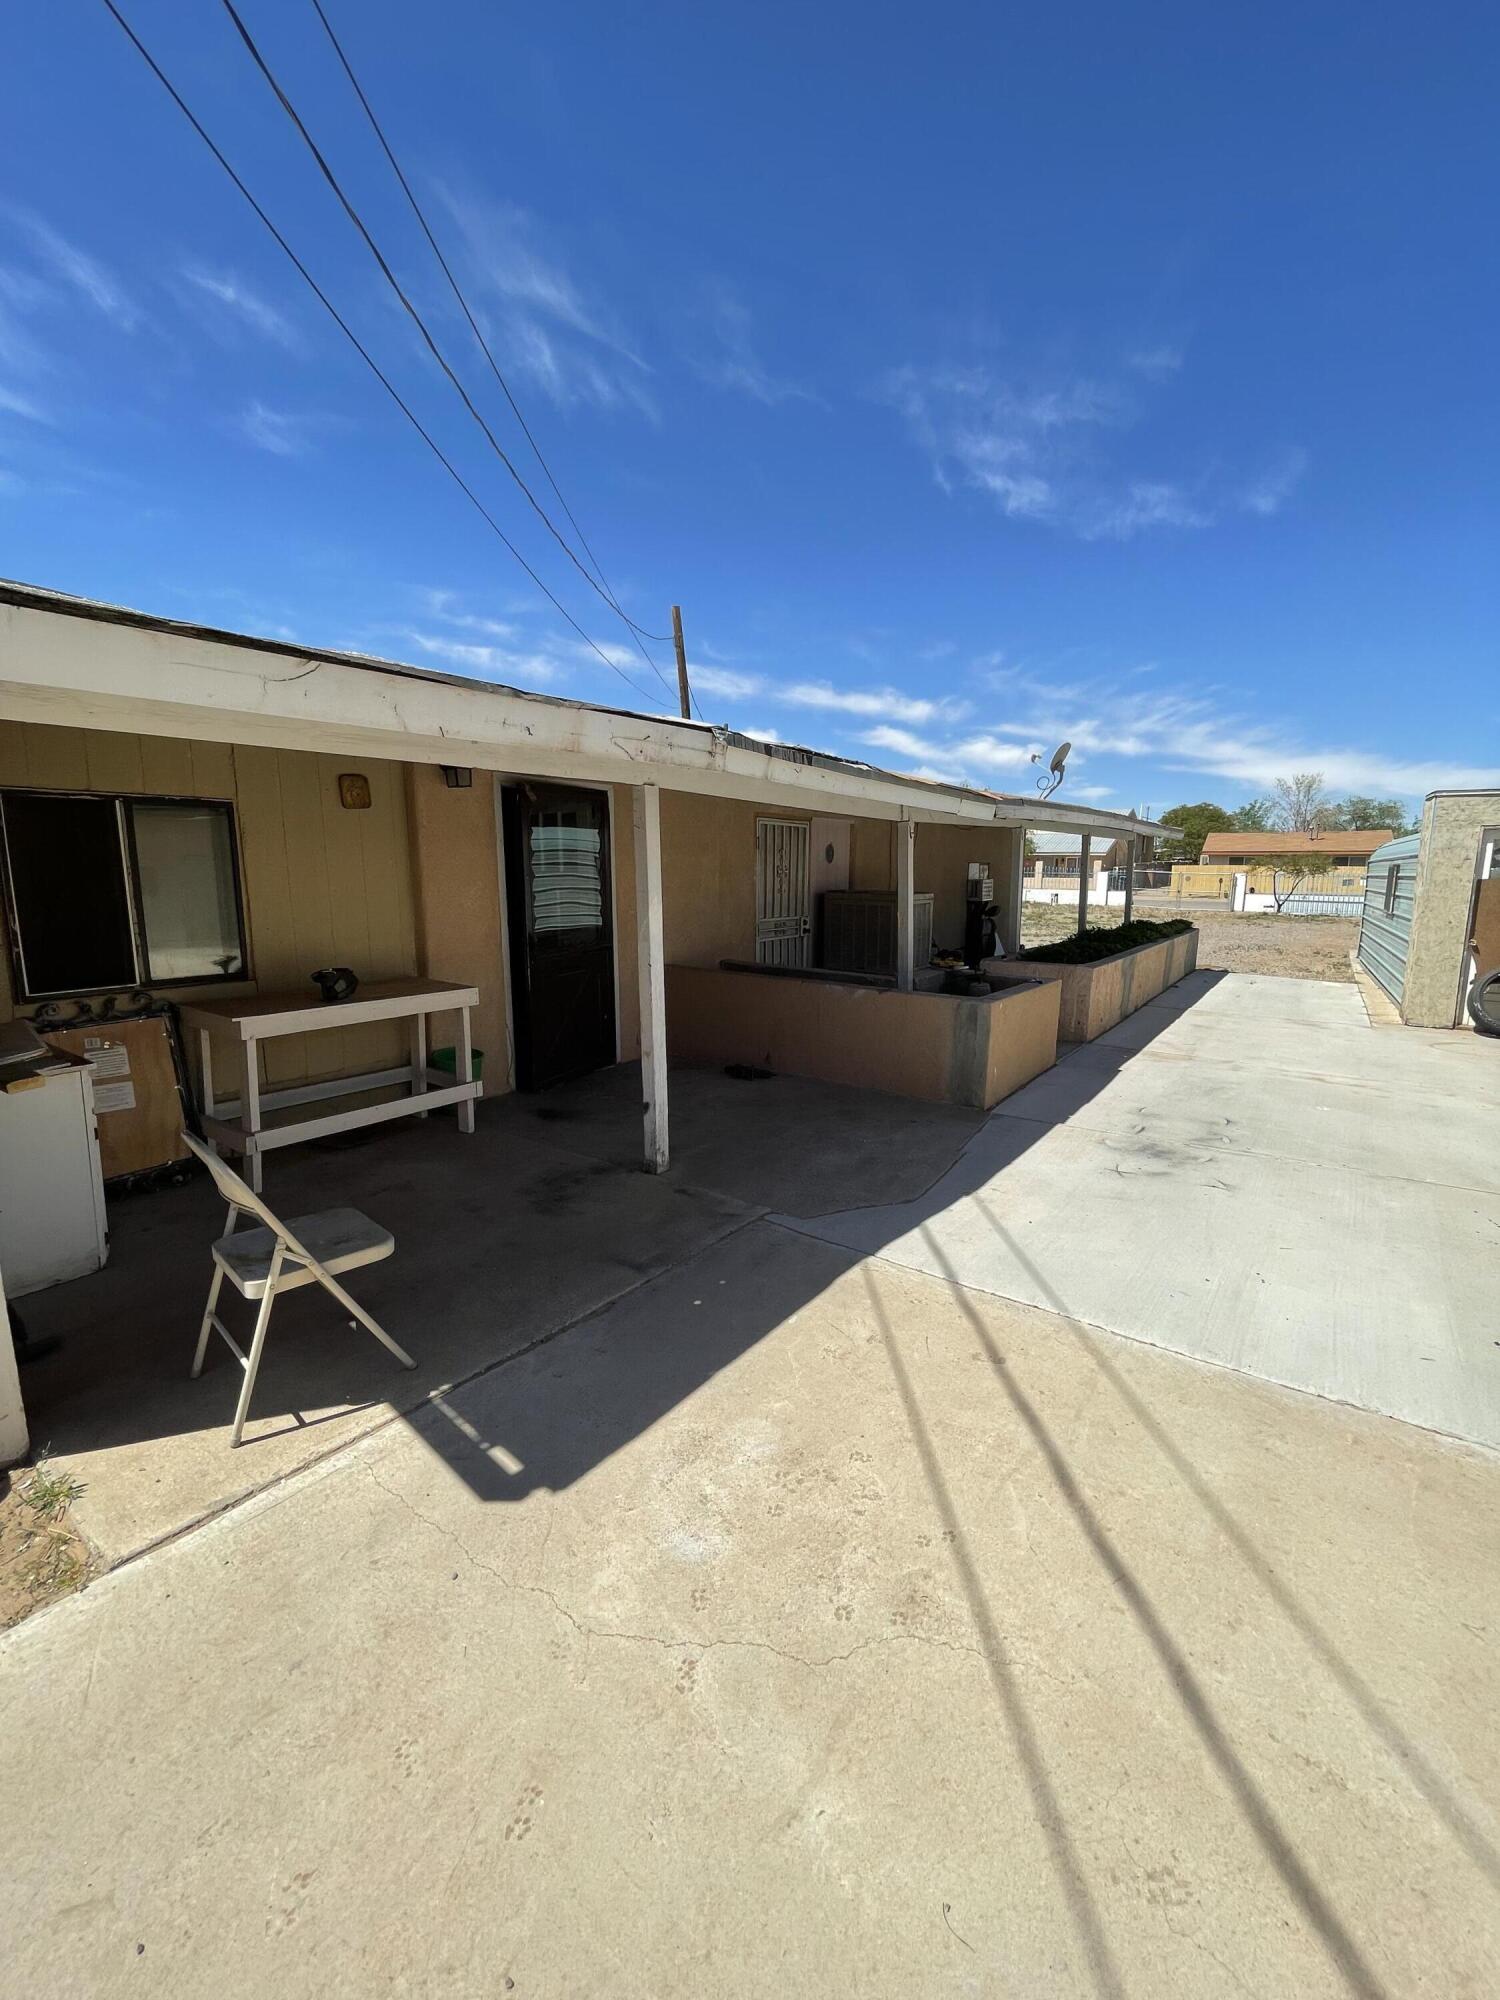 Great investment property in the south valley.  Needs TLC but definitely has great potential.  Property had a mobile home on it at one point as well(buyers need to inquire with Bernalillo County Zoning if a MH is still permitted. Backyard access possible to an alleyway.